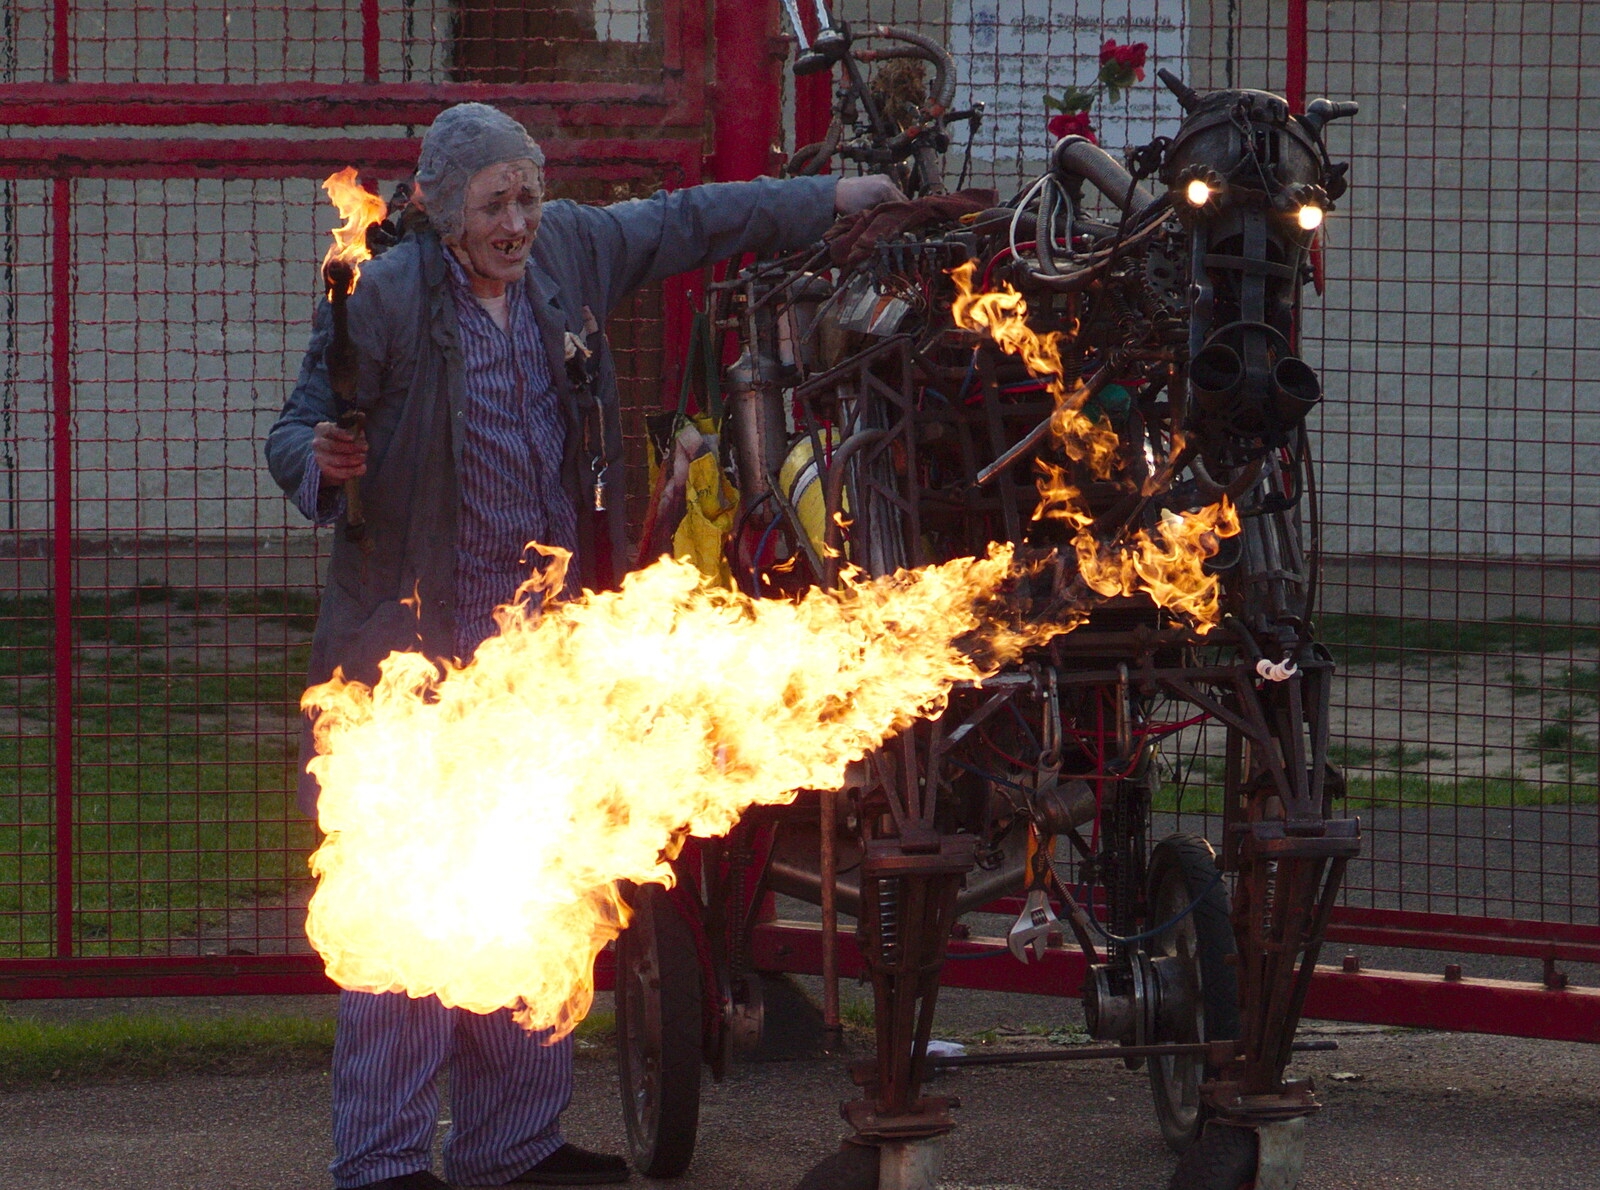 The horse breathes some impressive flames from A Family Fun Day on the Park, Diss, Norfolk - 16th May 2014